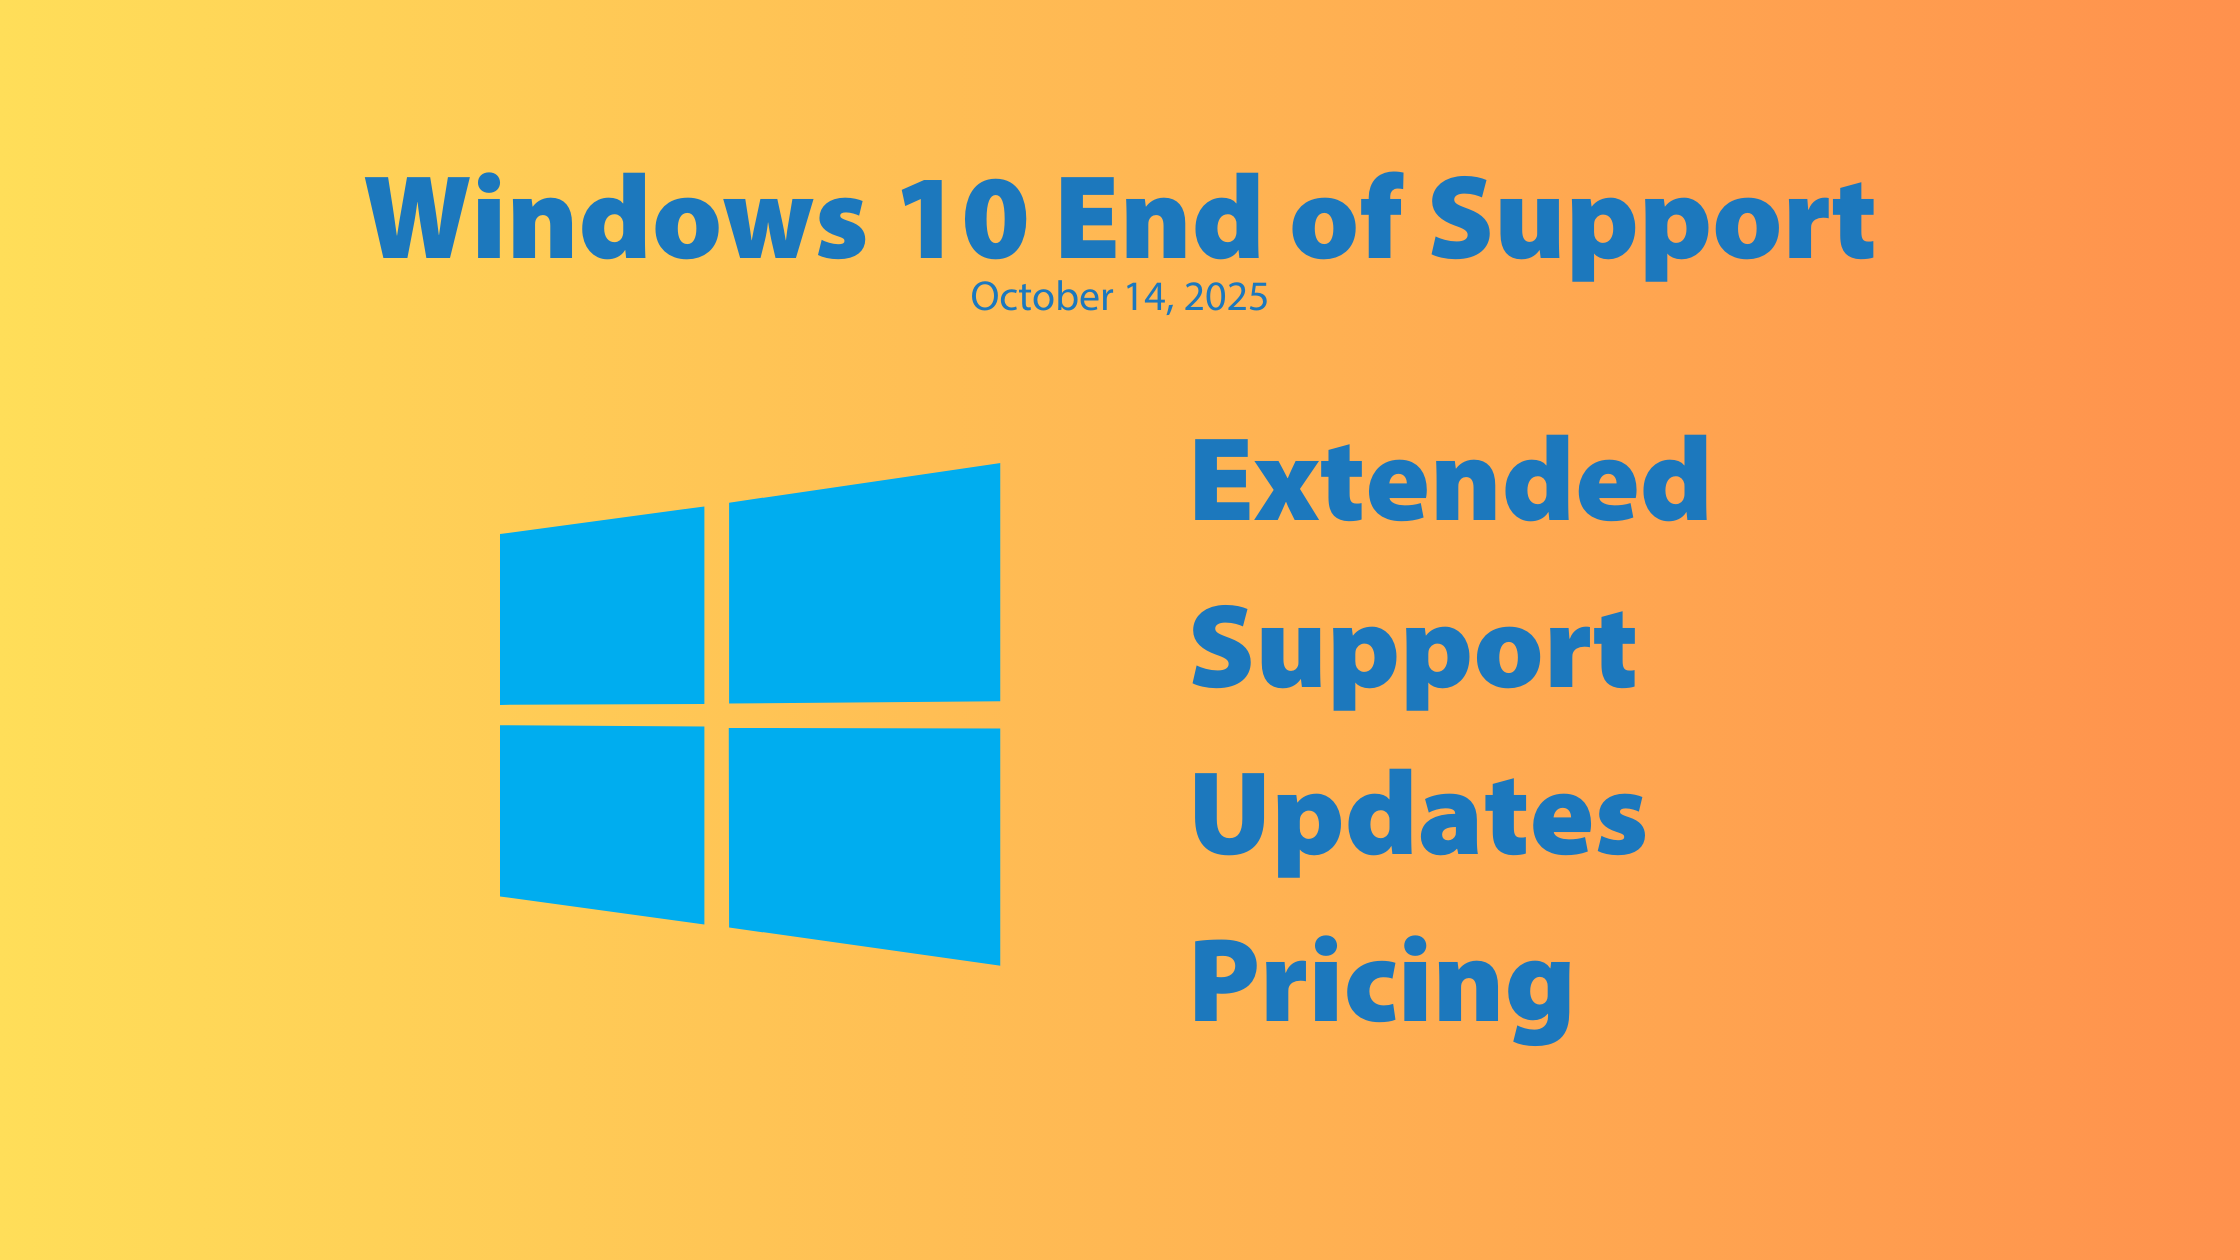 Windows 10 End of Support Extended Support Updates Pricing